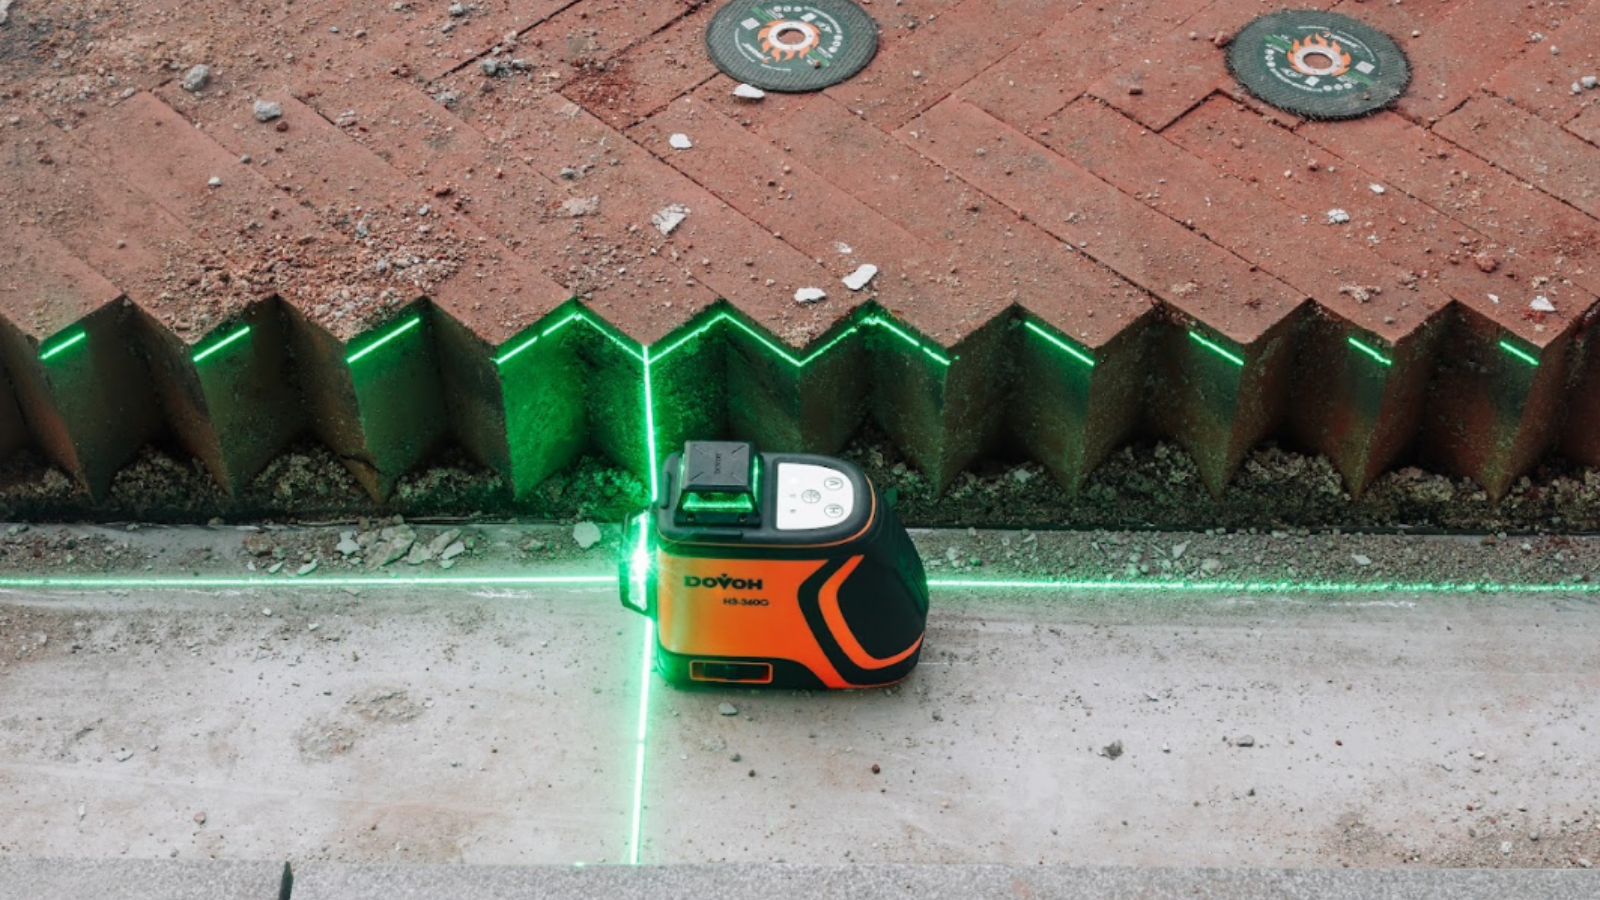 High Visibility Laser Level - Is it Worth Purchasing? 